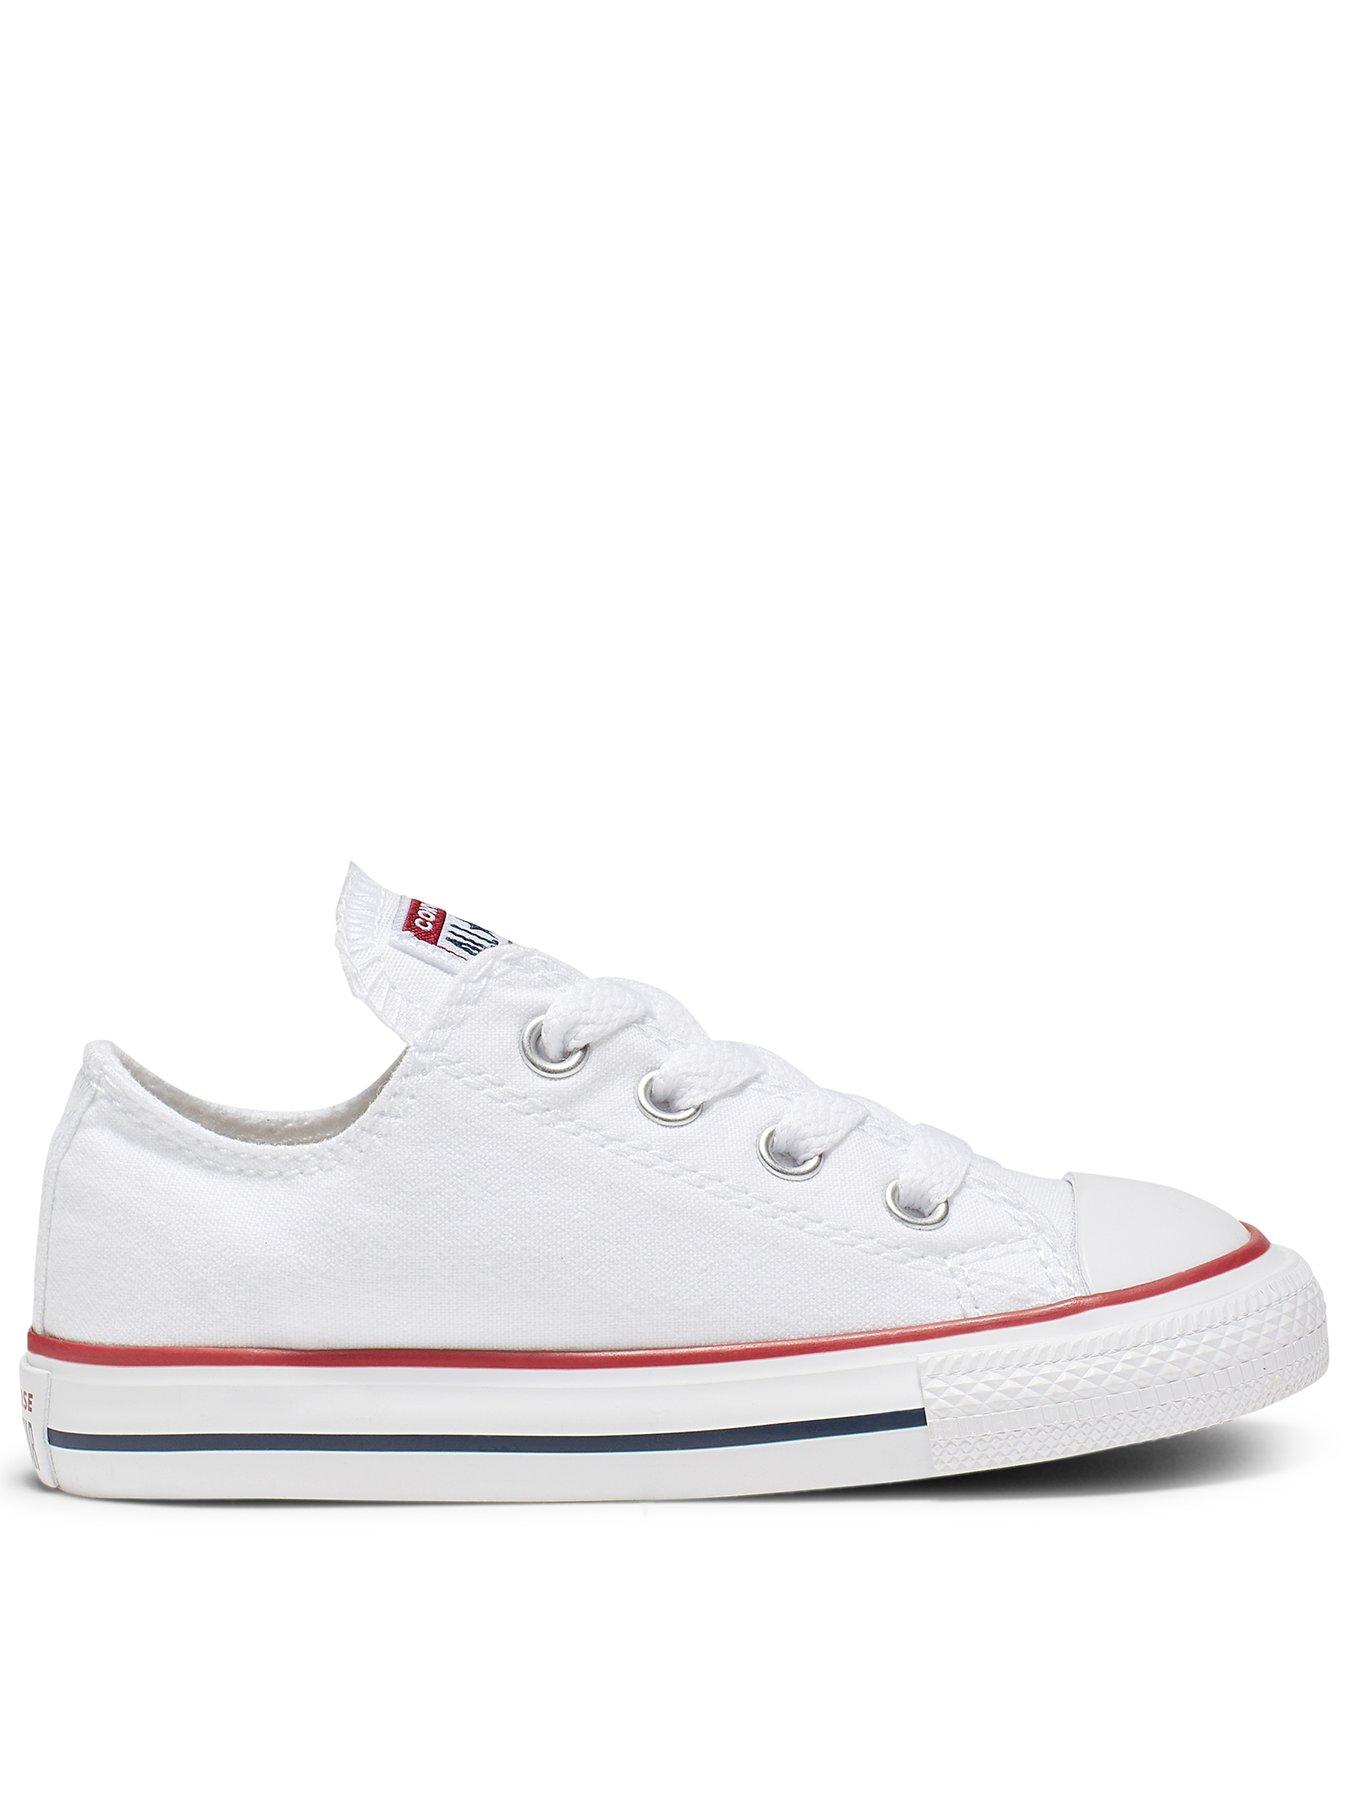 white converse for baby